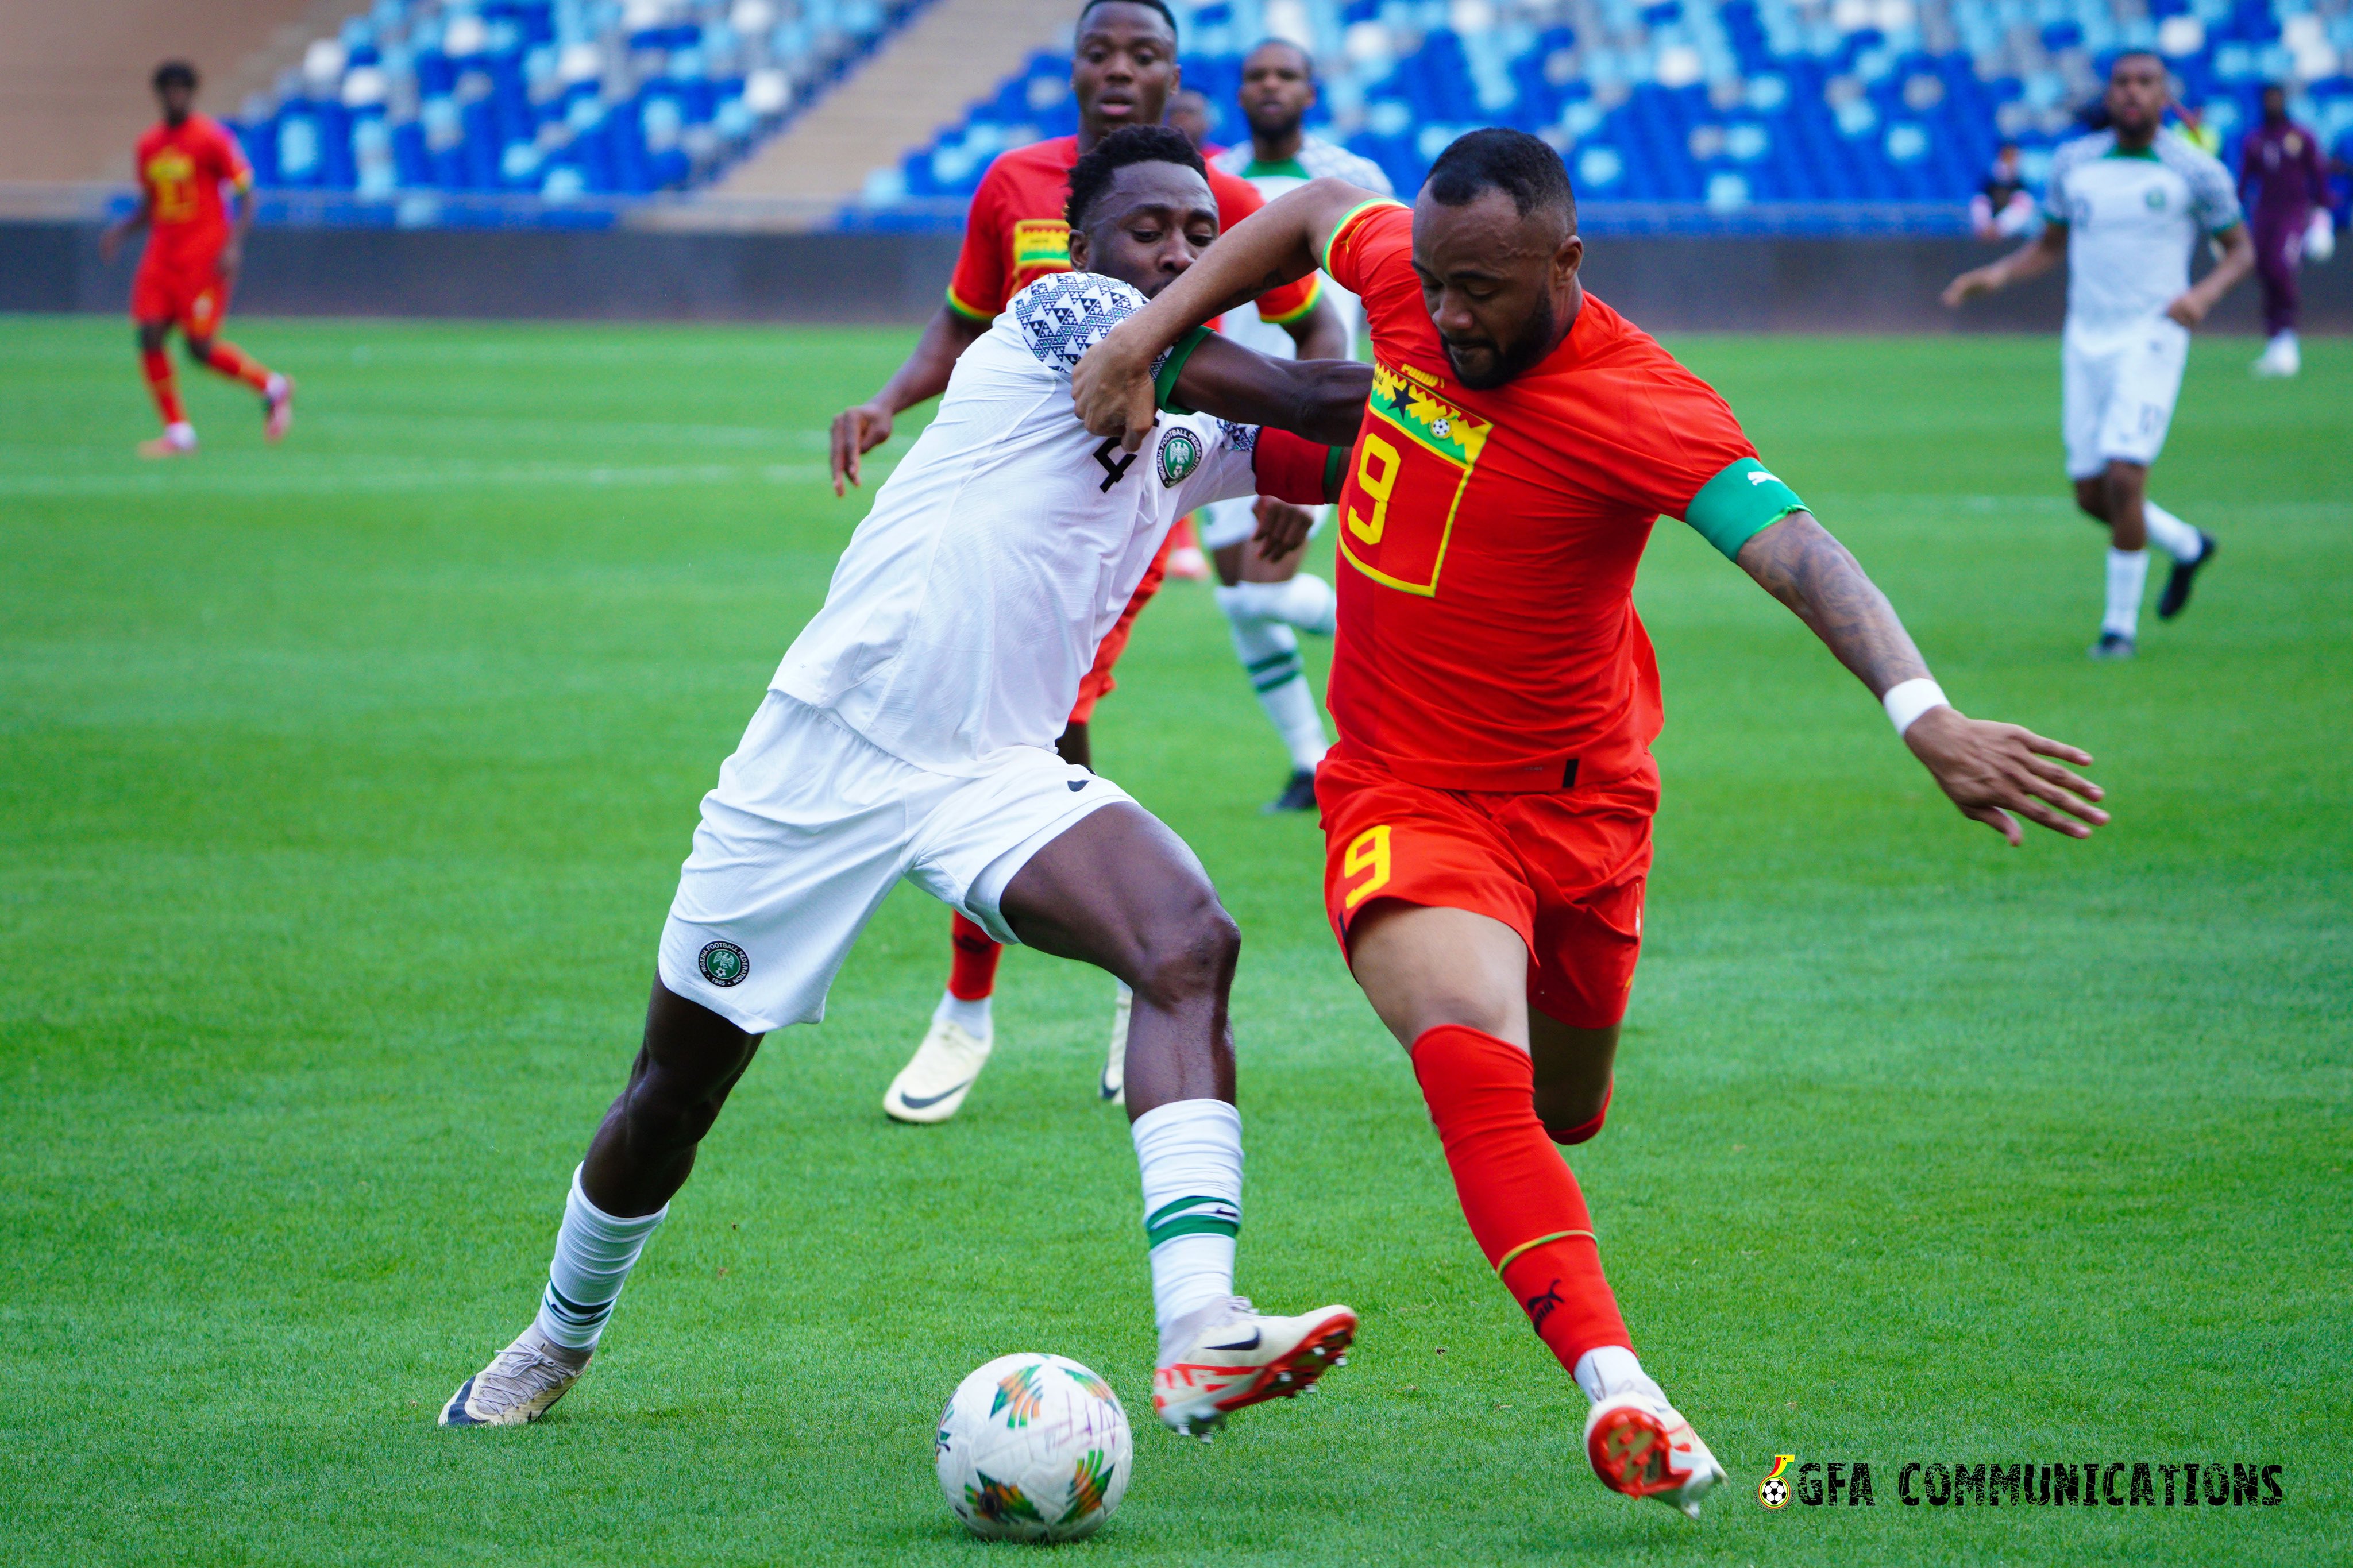 Ghana 1-2 Nigeria: Black Stars lose to Super Eagles for the first time in 18 years